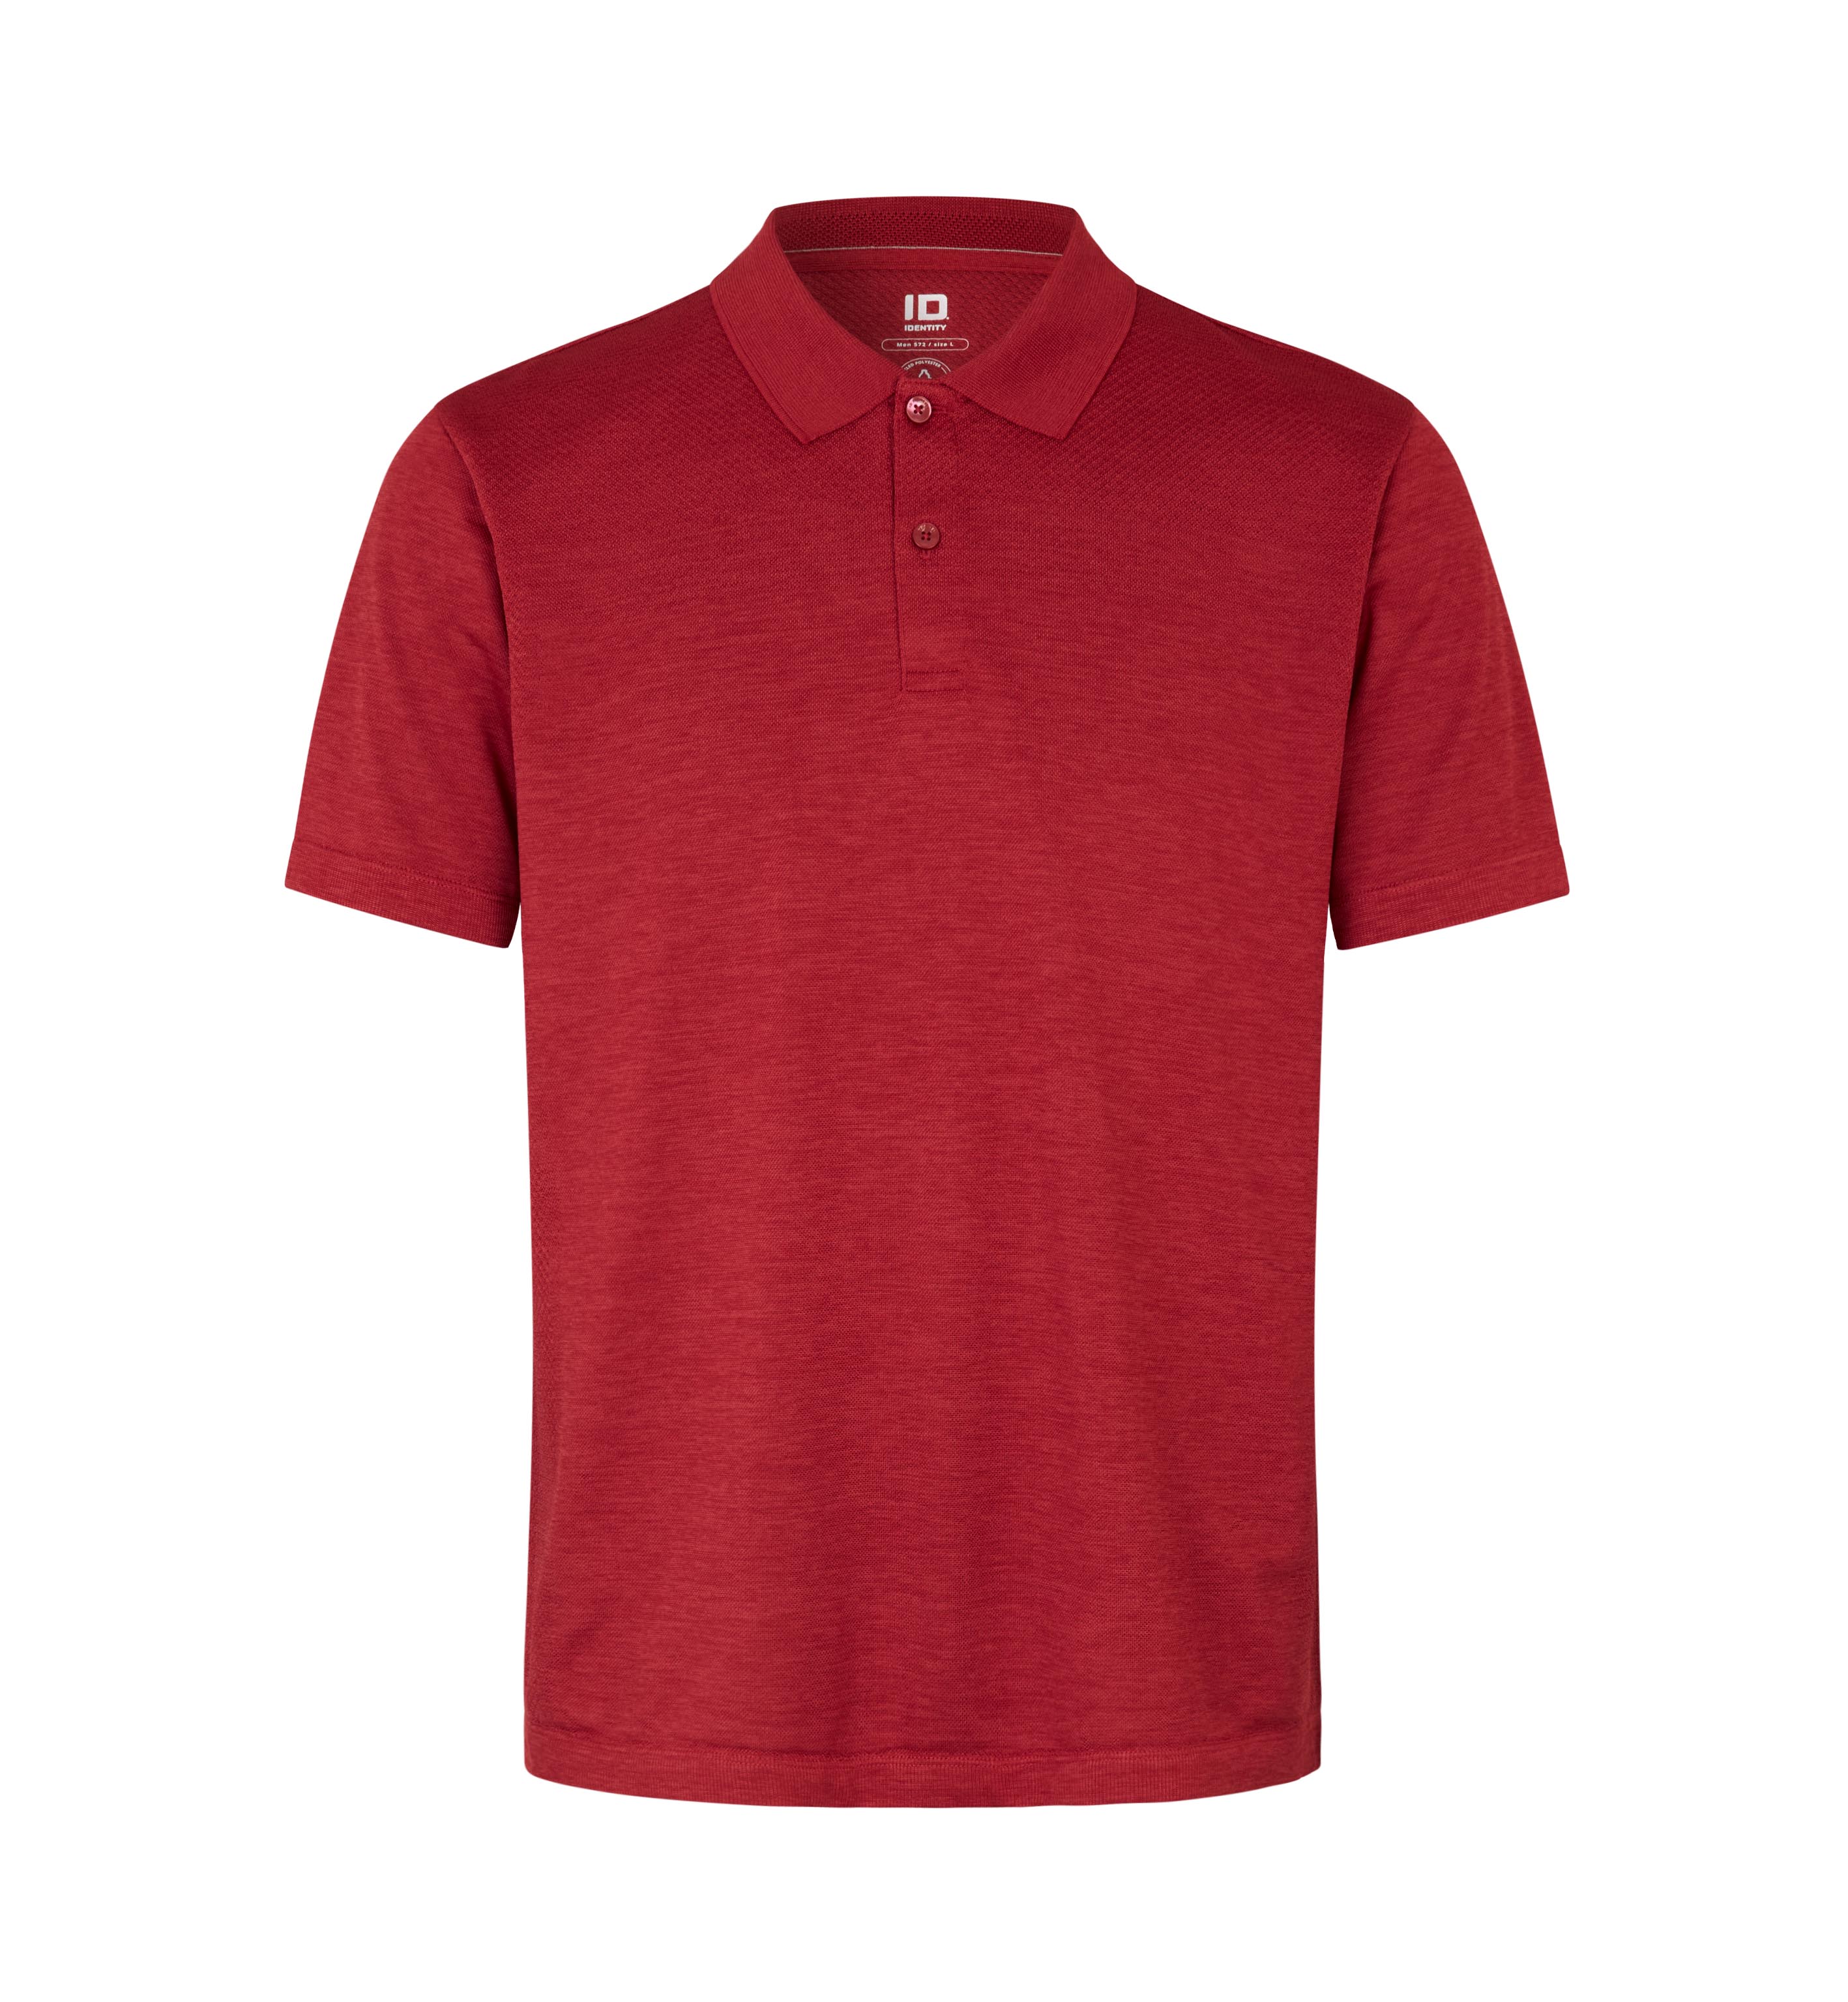 Active Workwear-Funktions-Poloshirt ID Identity® Dunkel Rot Meliert M